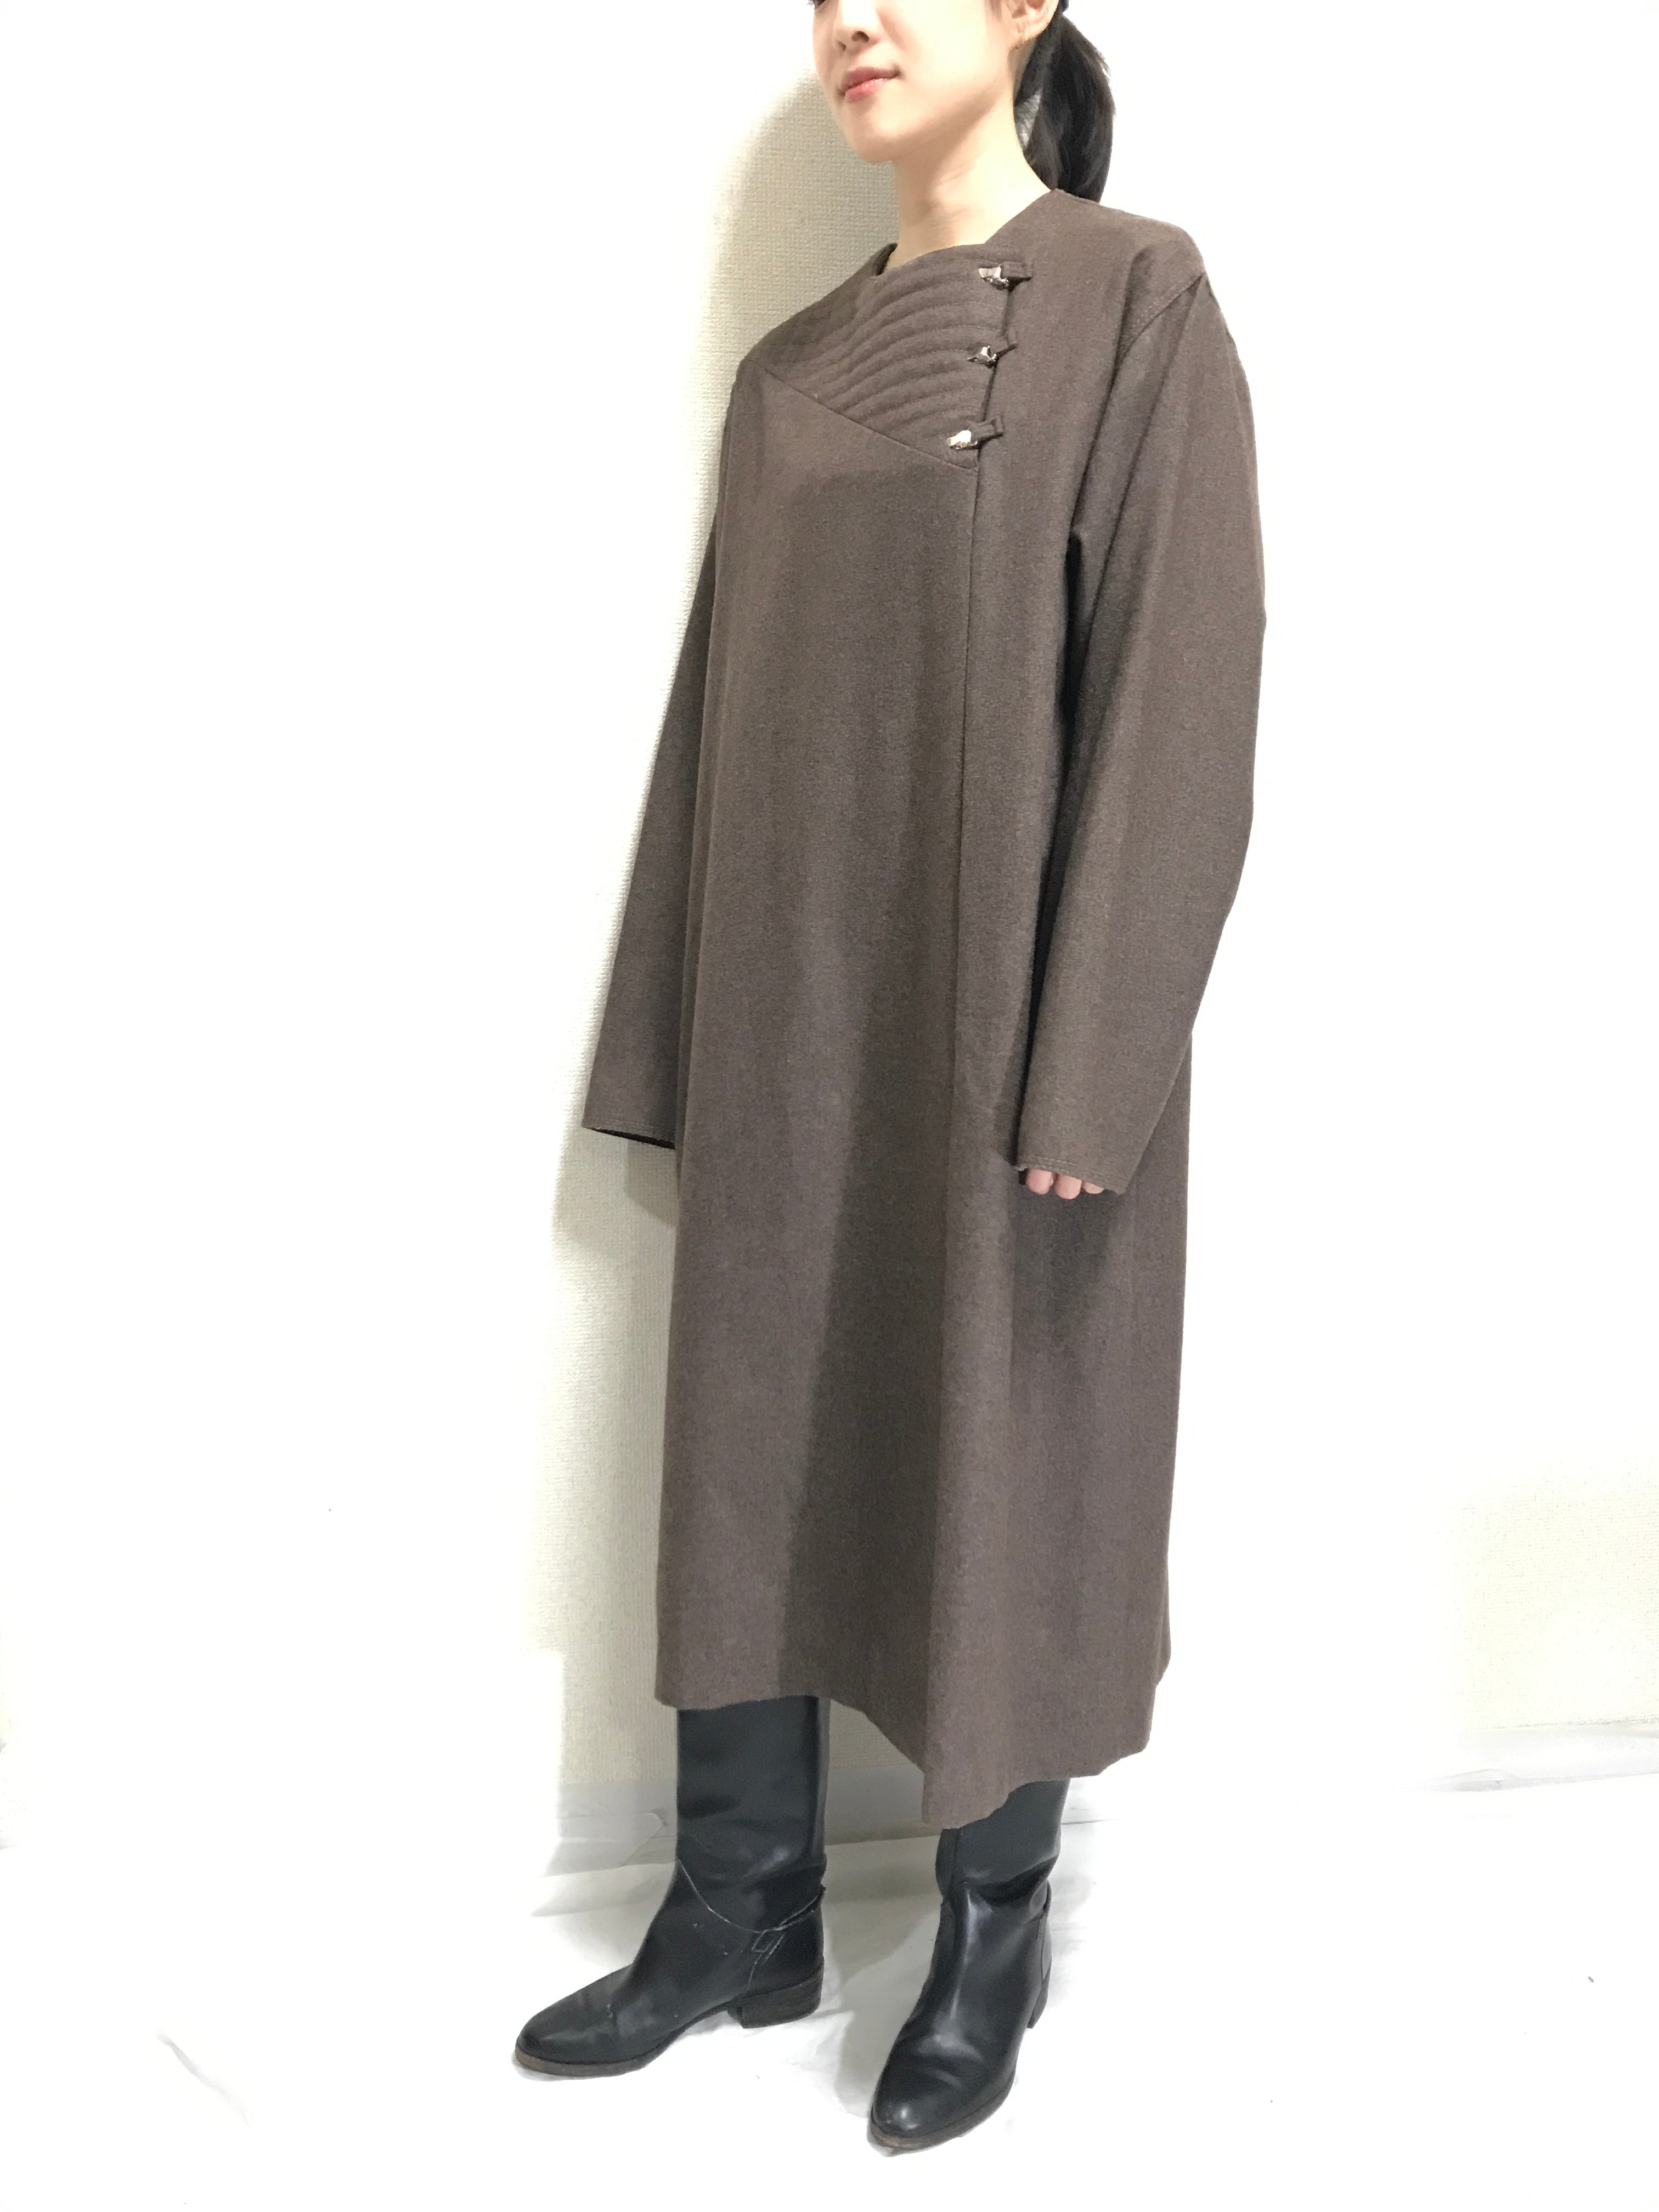 80’s Italian made wool pullover dress with metal hook